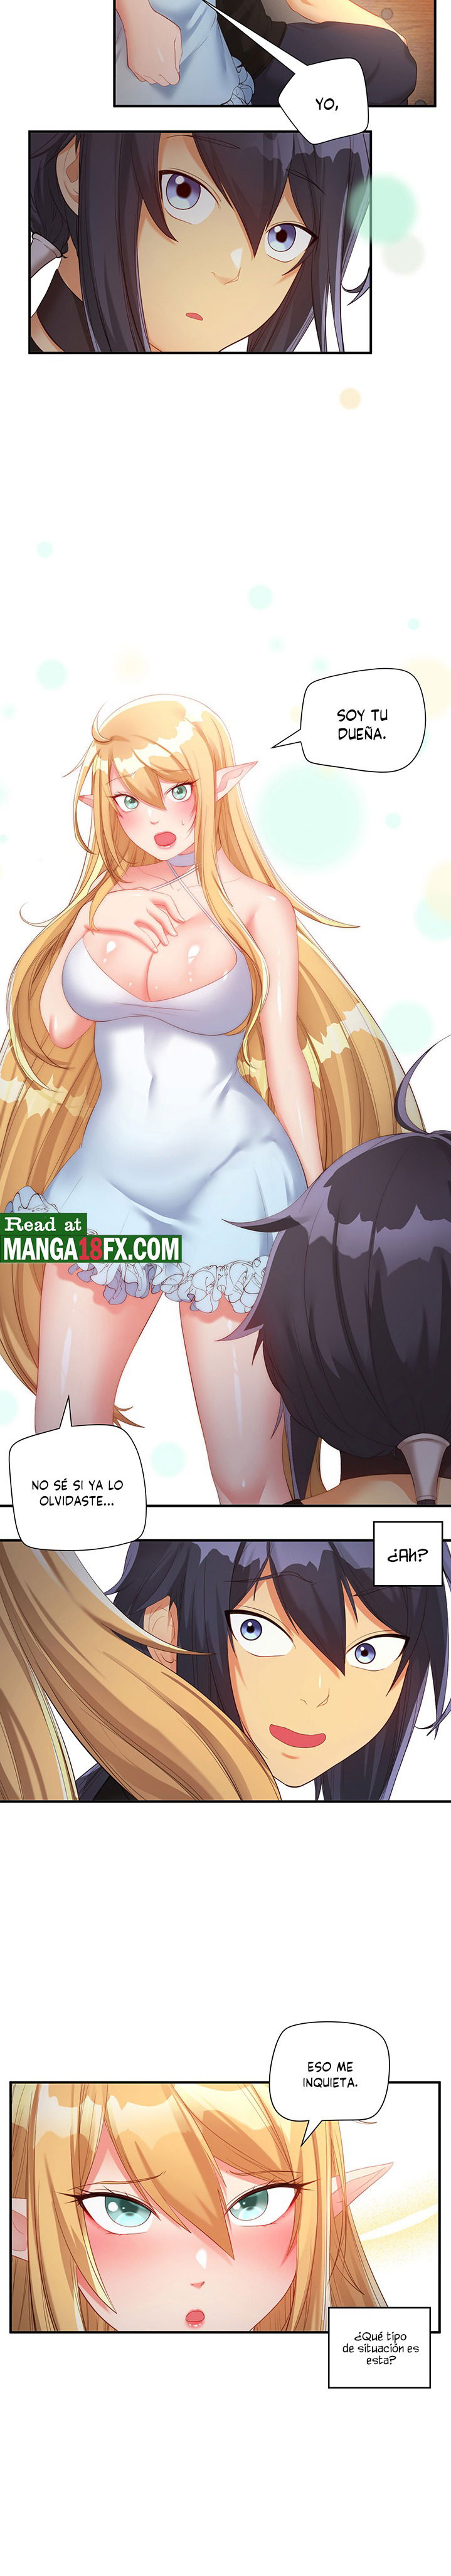 slave-knight-of-the-elf-raw-chap-33-8